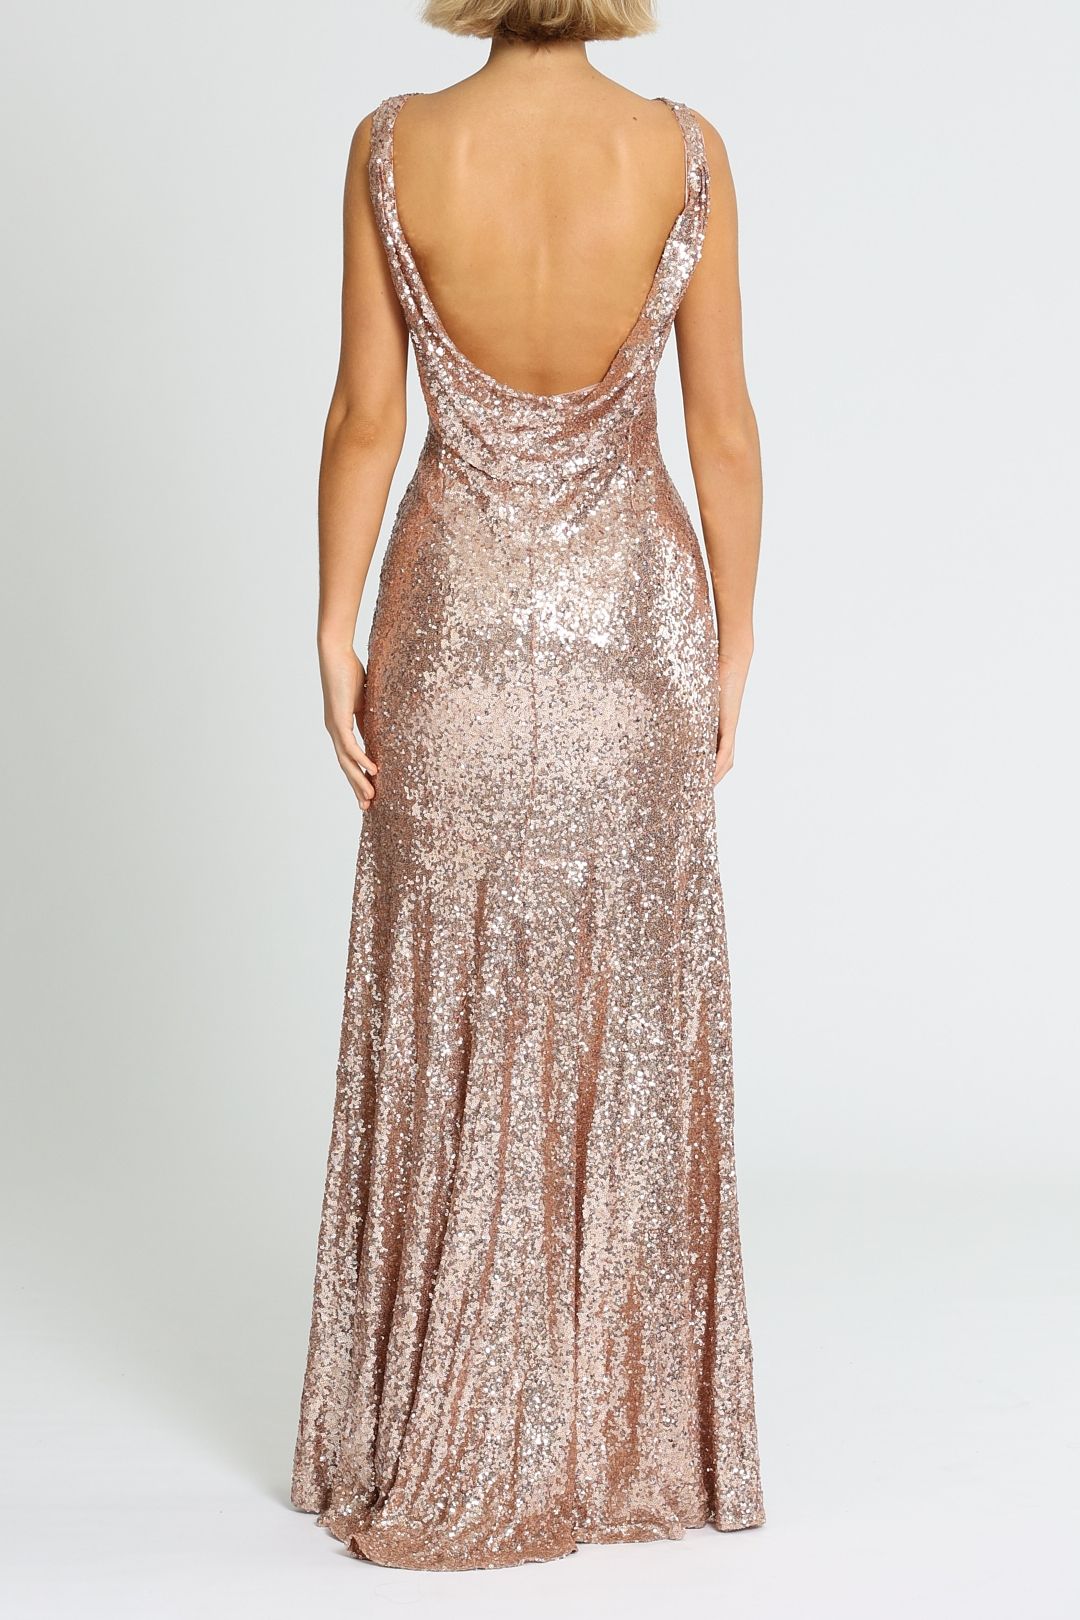 Theia Gemma Gown Rose Gold Cowl Back